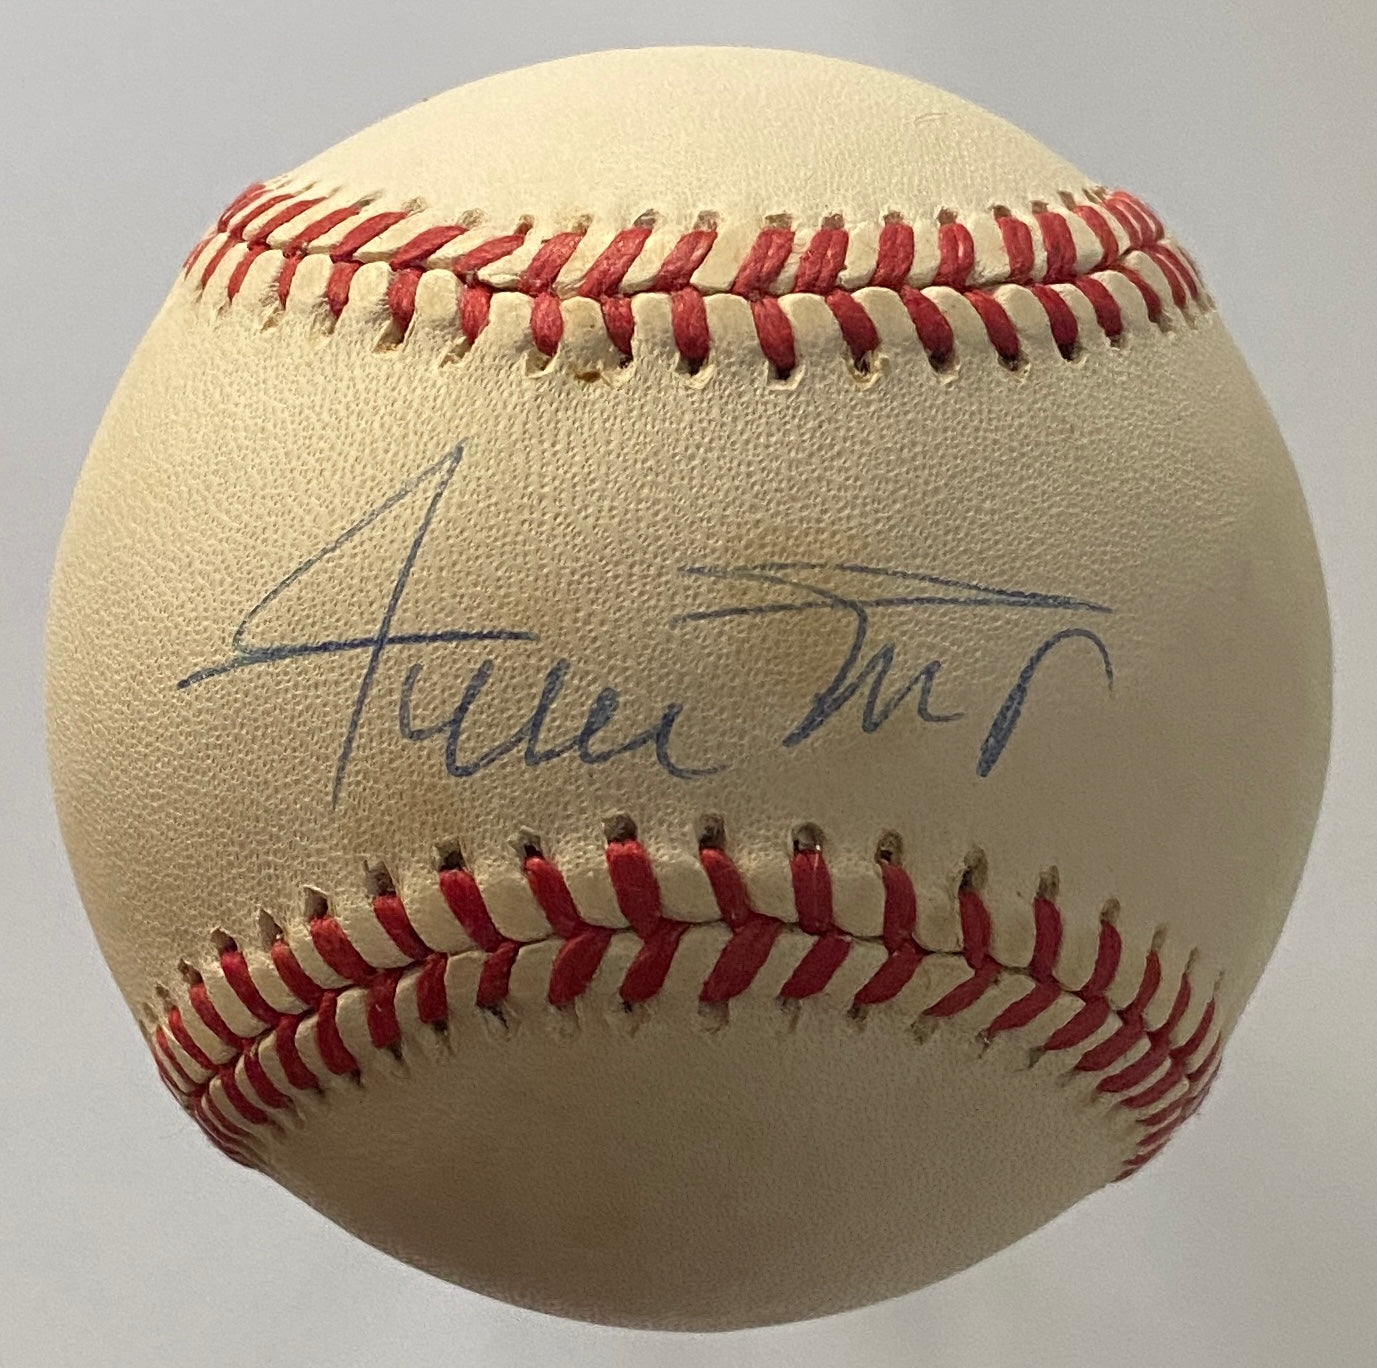 Willie Mays Signed Baseball Authenticated By JSA LOA